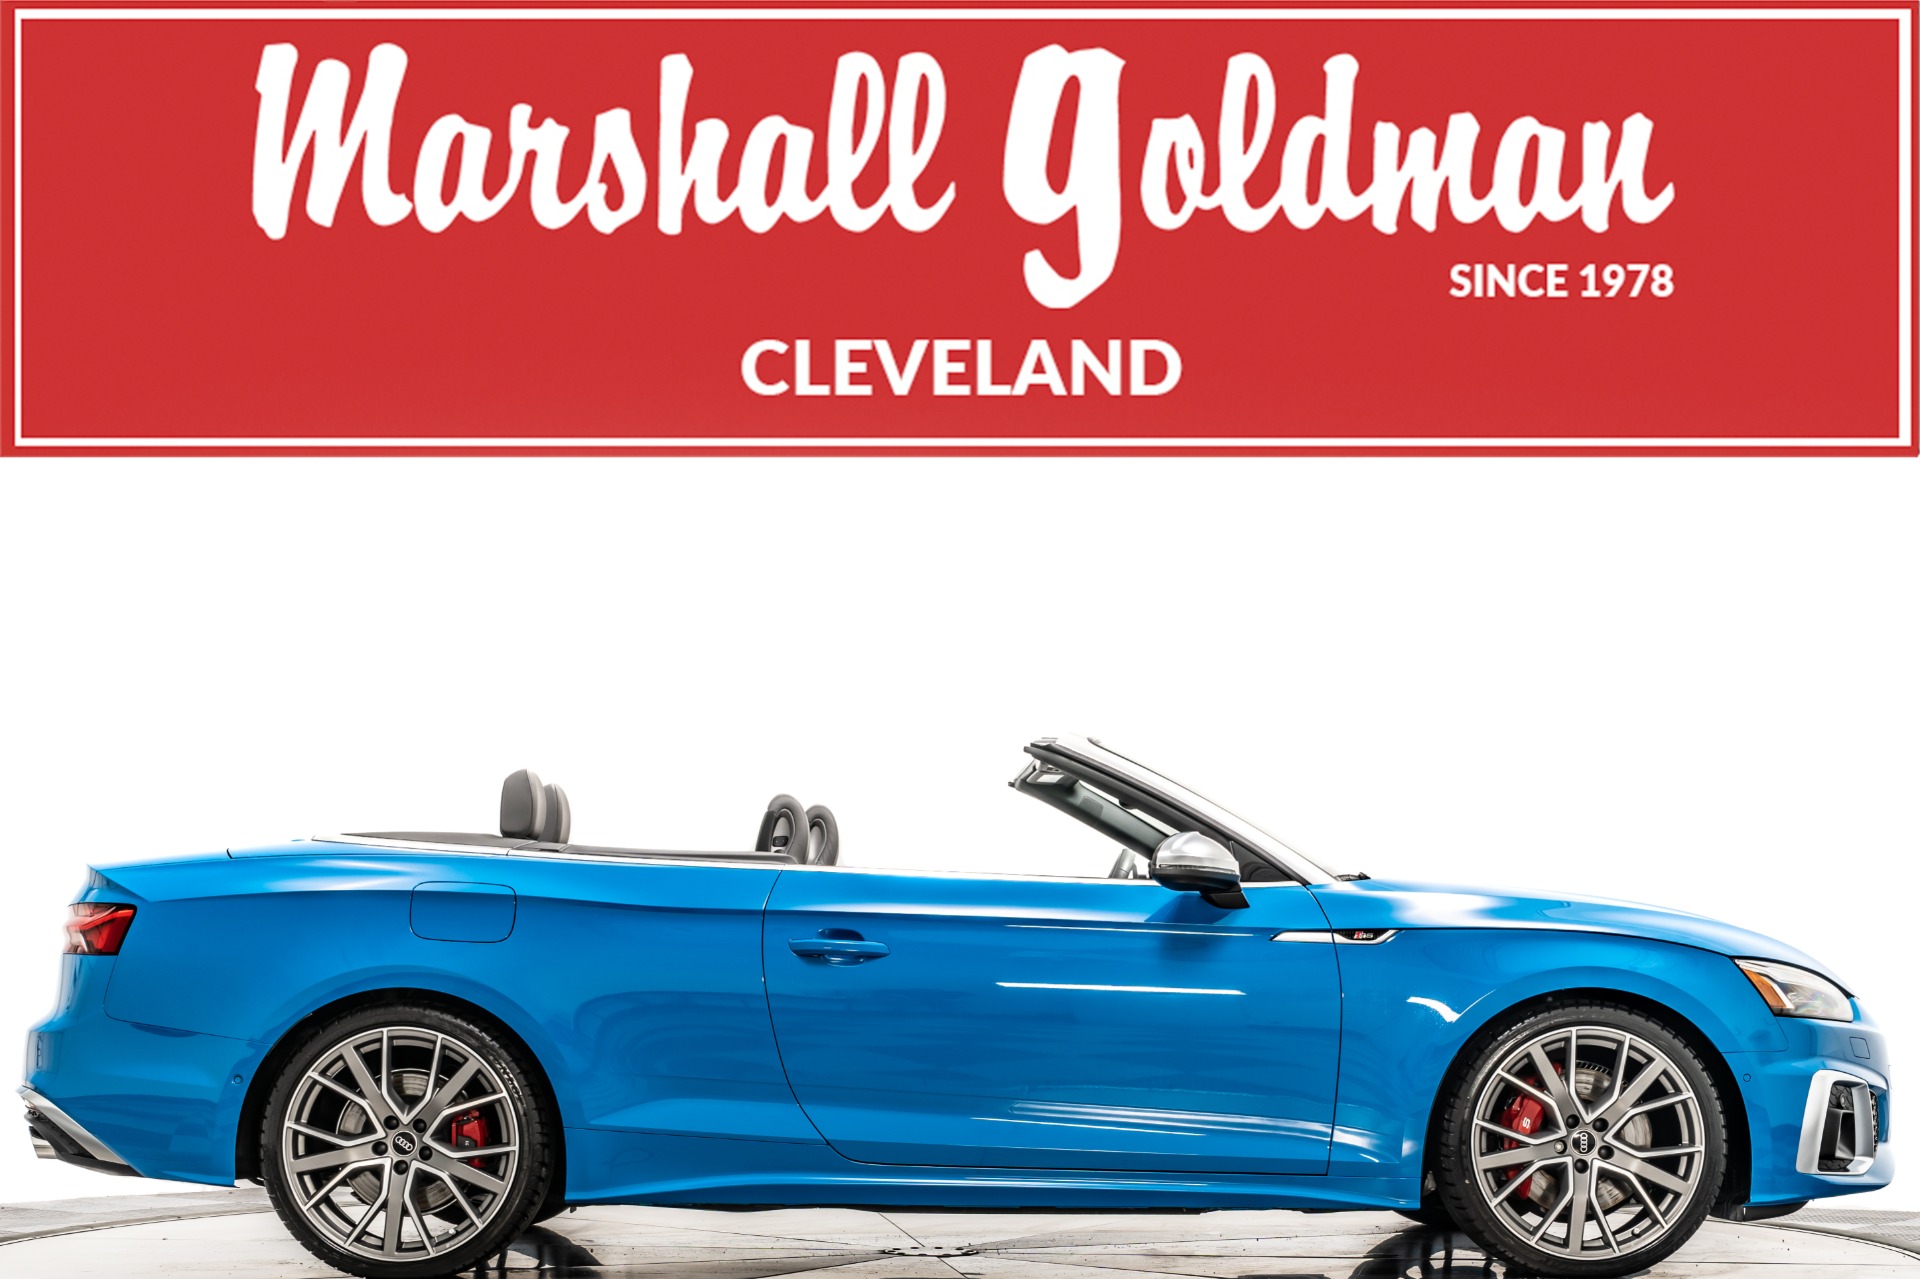 og:title":"Used 2022 Audi S5 Prestige Cabriolet For Sale (Sold) | Marshall  Goldman Motor Sales Stock #WS5APB","og:description":"Used 2022 Audi S5  Prestige Cabriolet Stock # WS5APB in Warrensville Heights, OH at Marshall  Goldman Motor